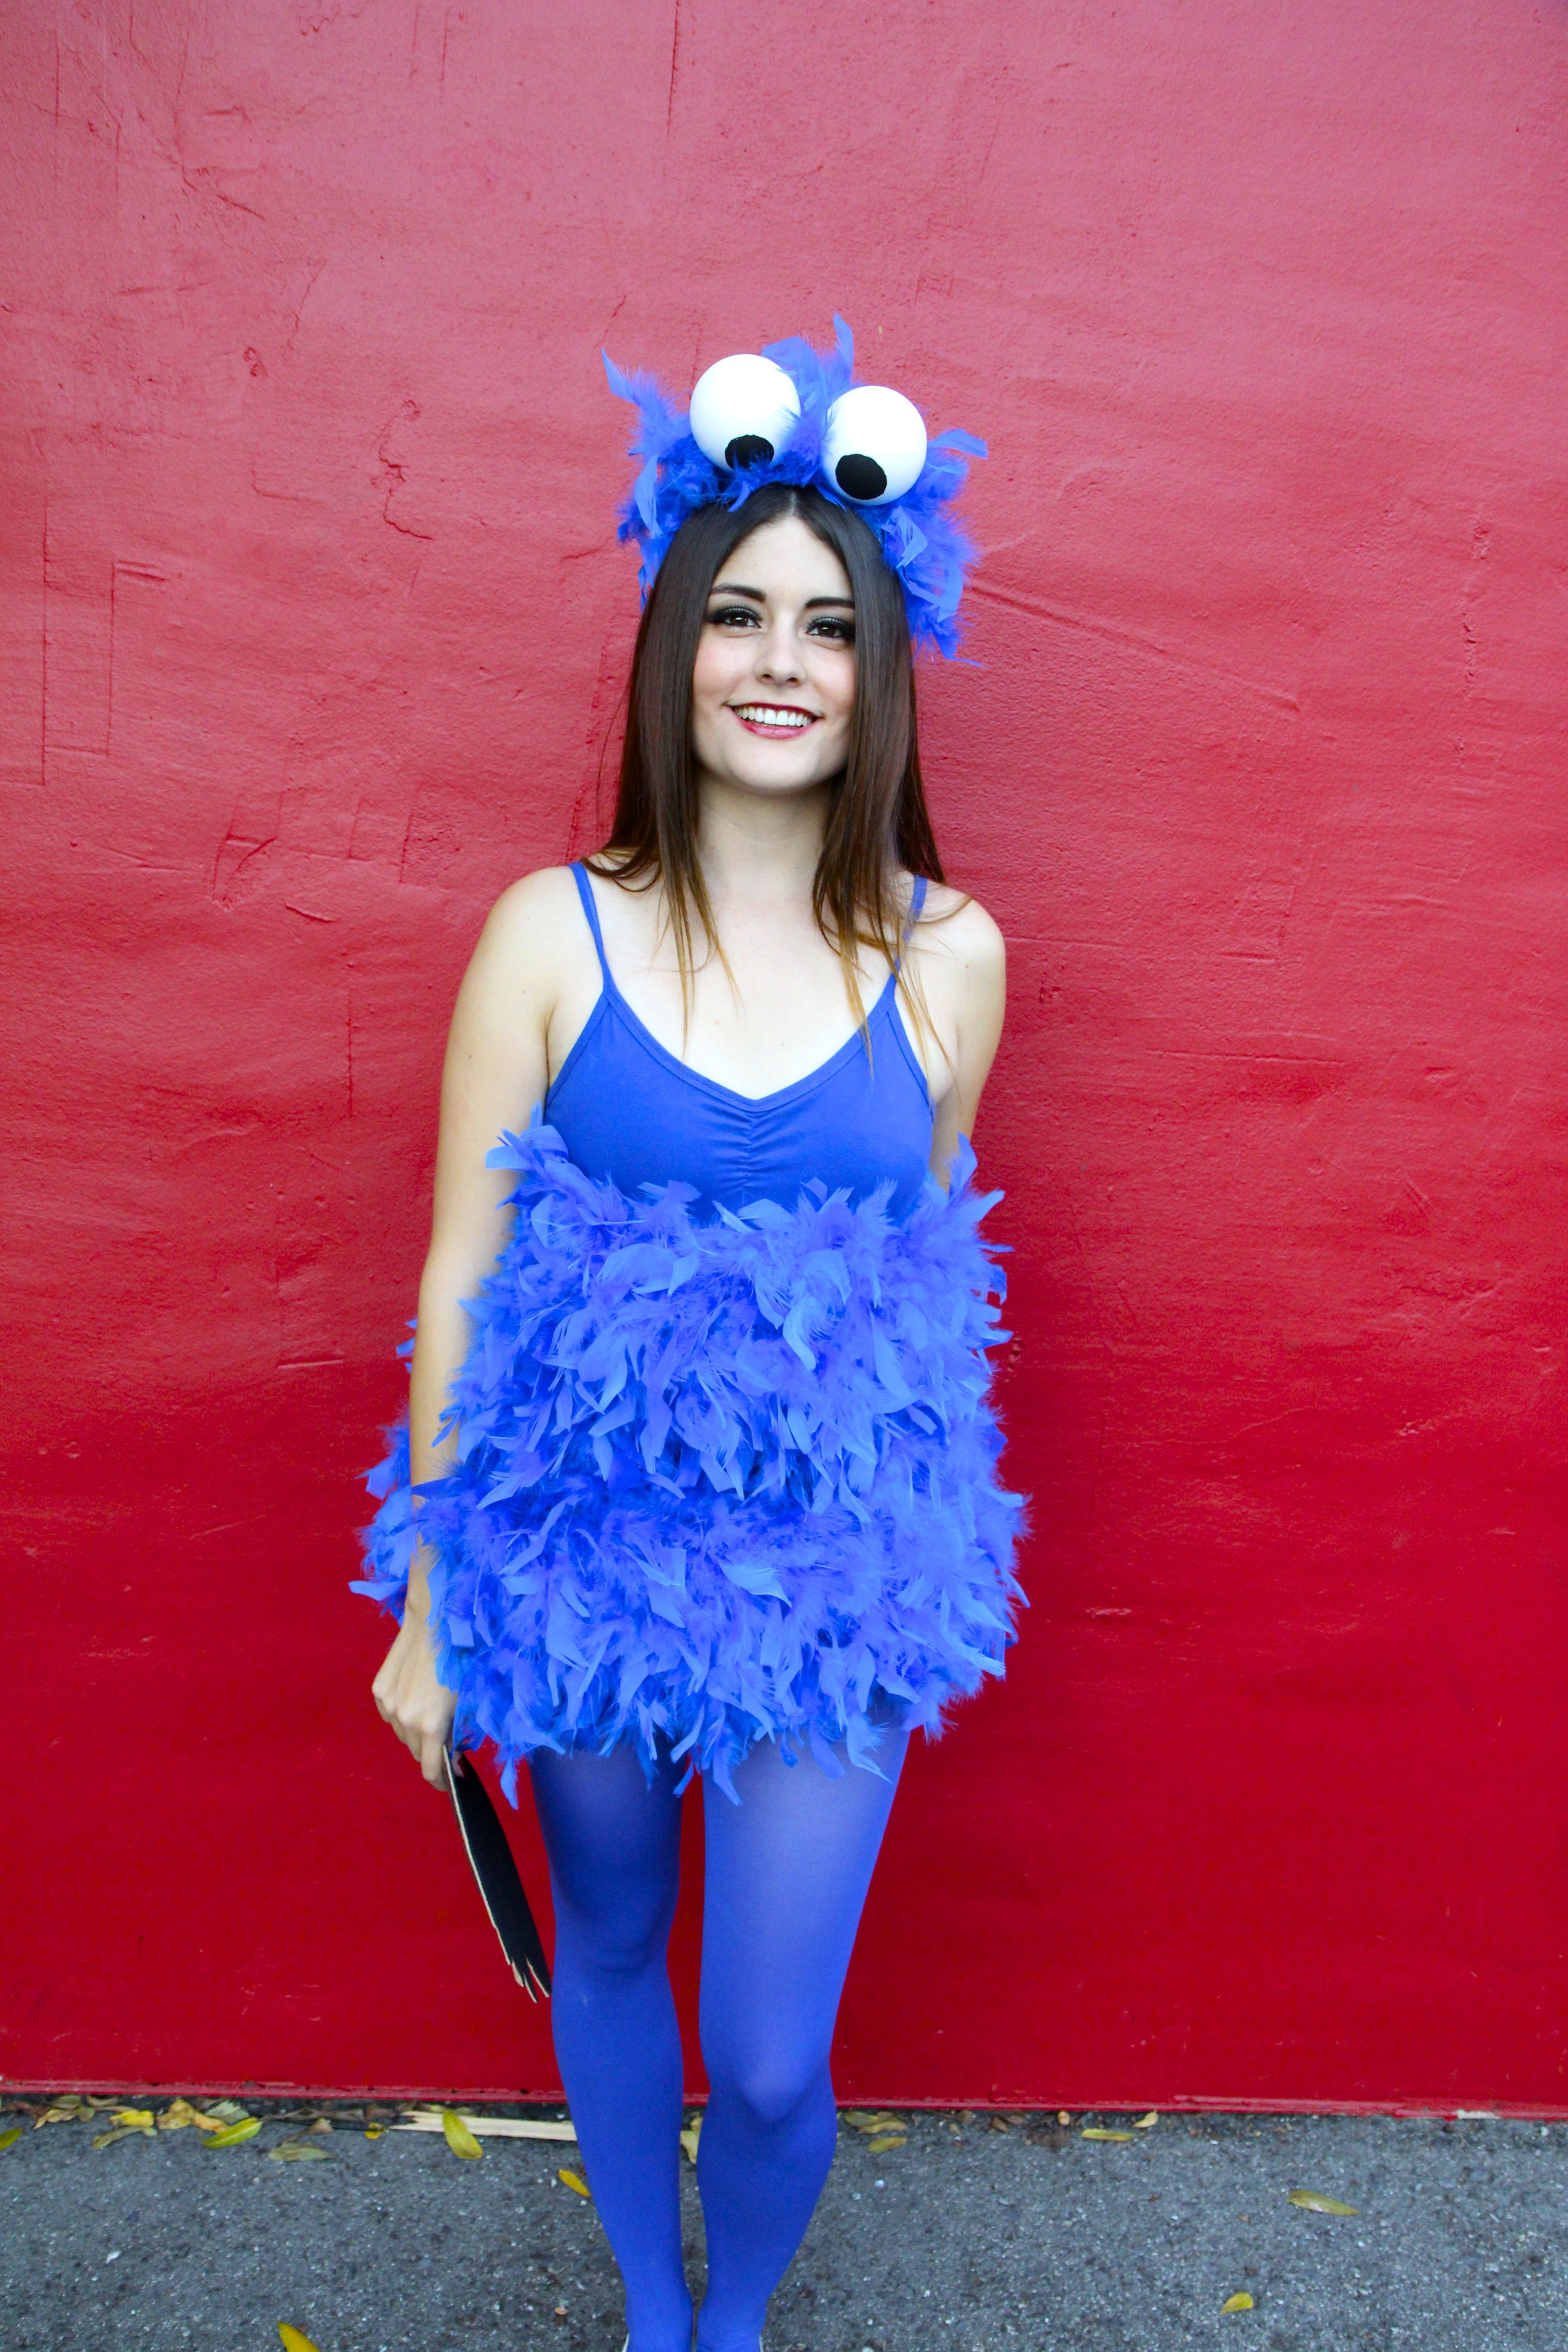 DIY Cookie Monster Costume
 You gotta admit Cookie Monster is probably one of